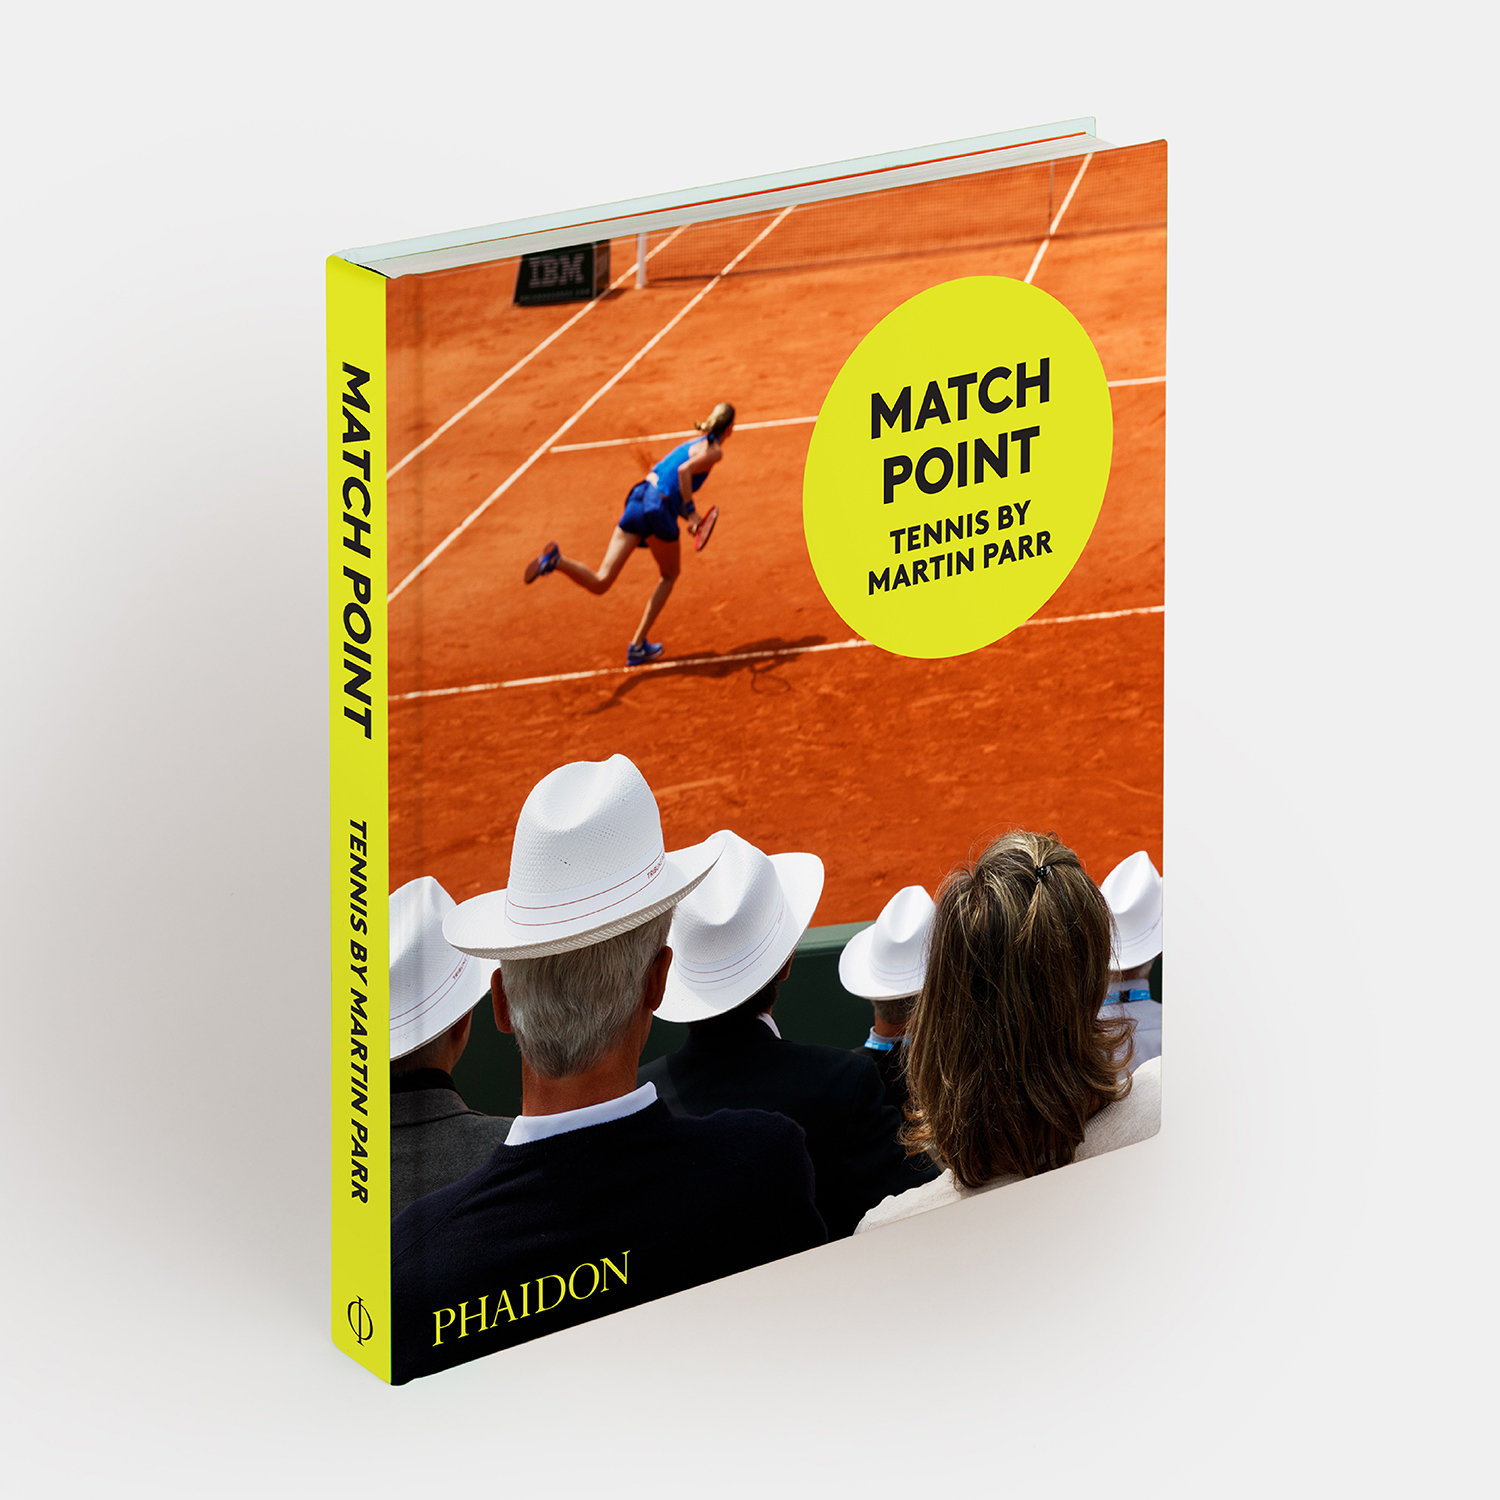 Match Point: Tennis With Martin Parr